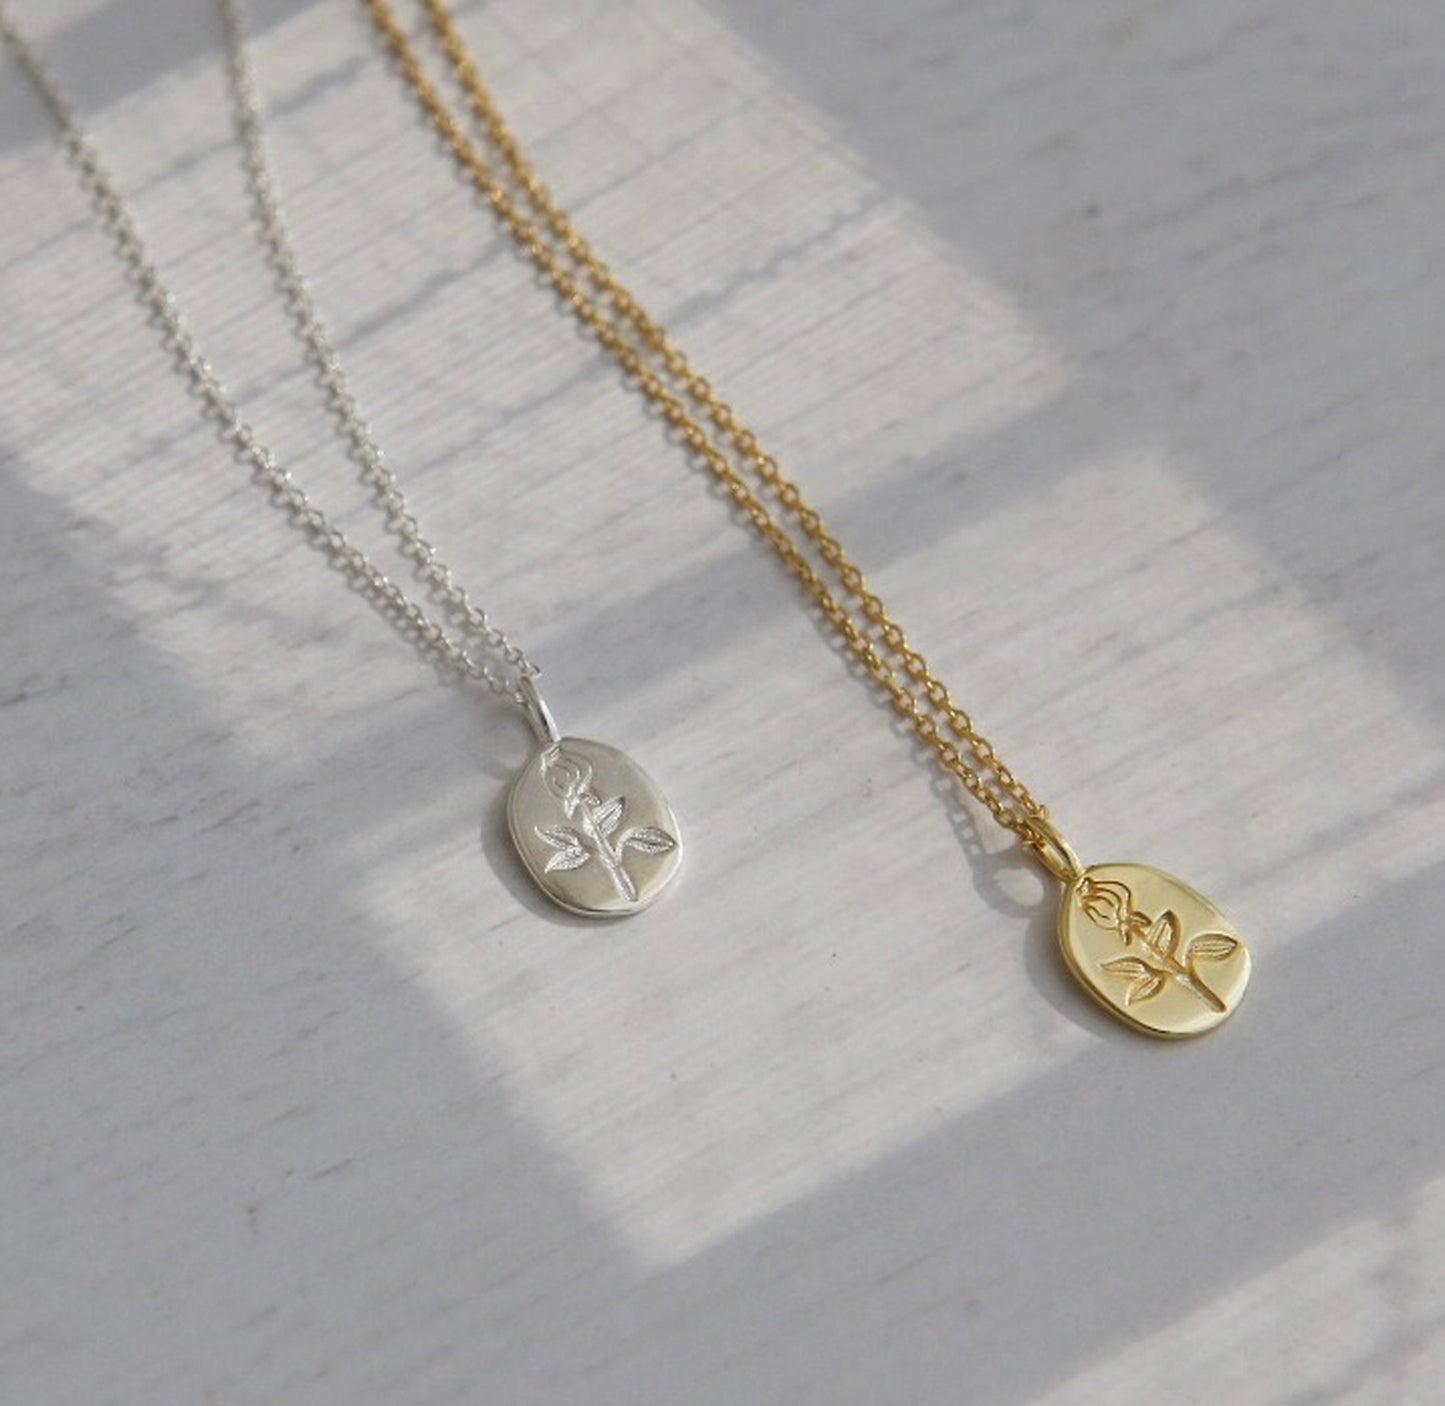 Handmade engraved flower necklace, Locket pendant layering necklace, Gold silver signet necklace, Birth flower charm necklace, Dainty gifts